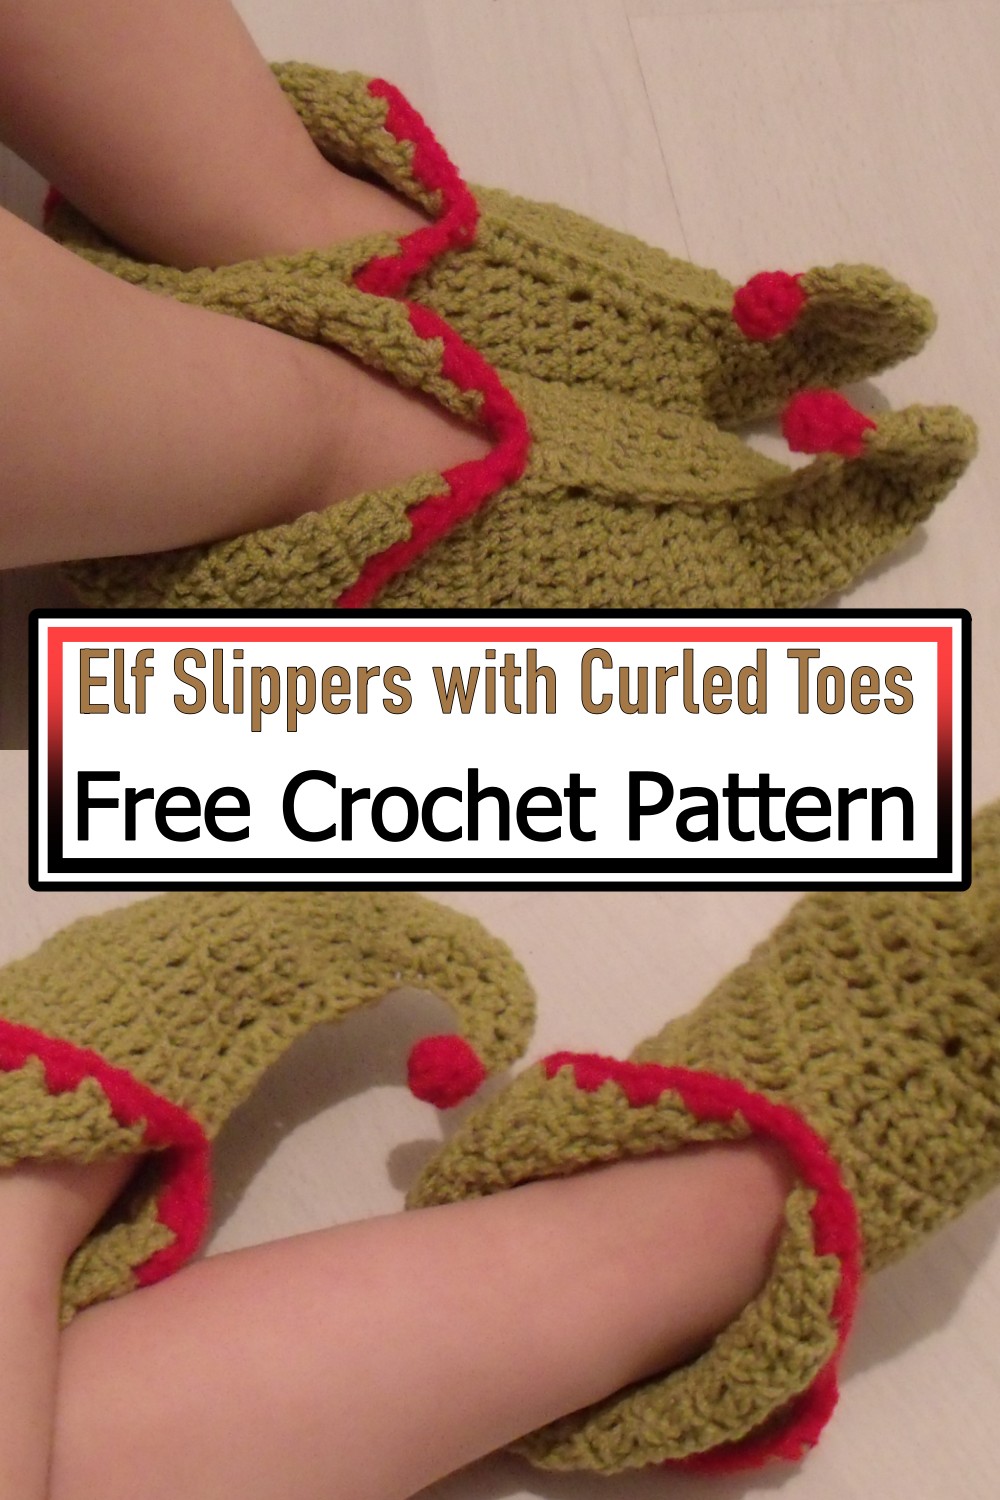 Elf Slippers with Curled Toes